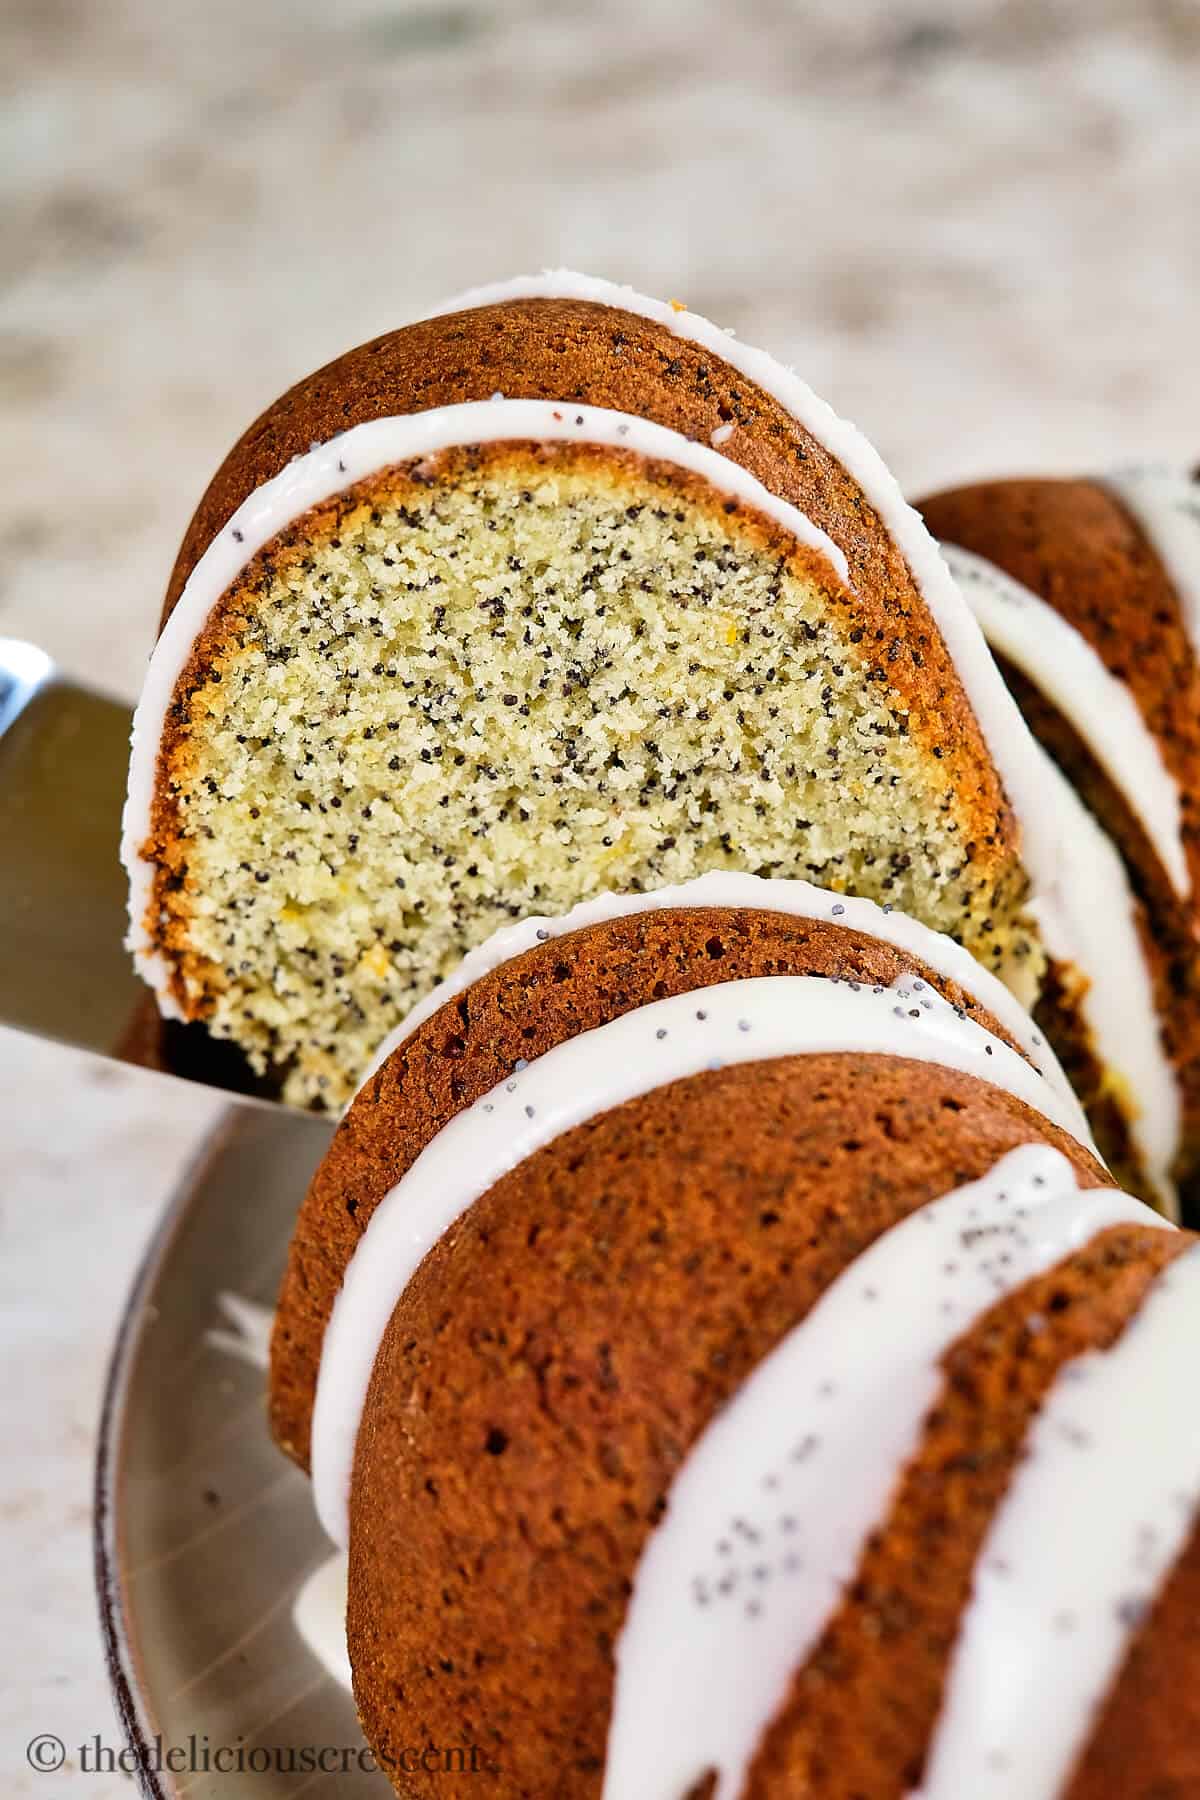 A slice of lemon poppy seed cake lifted from the plate.